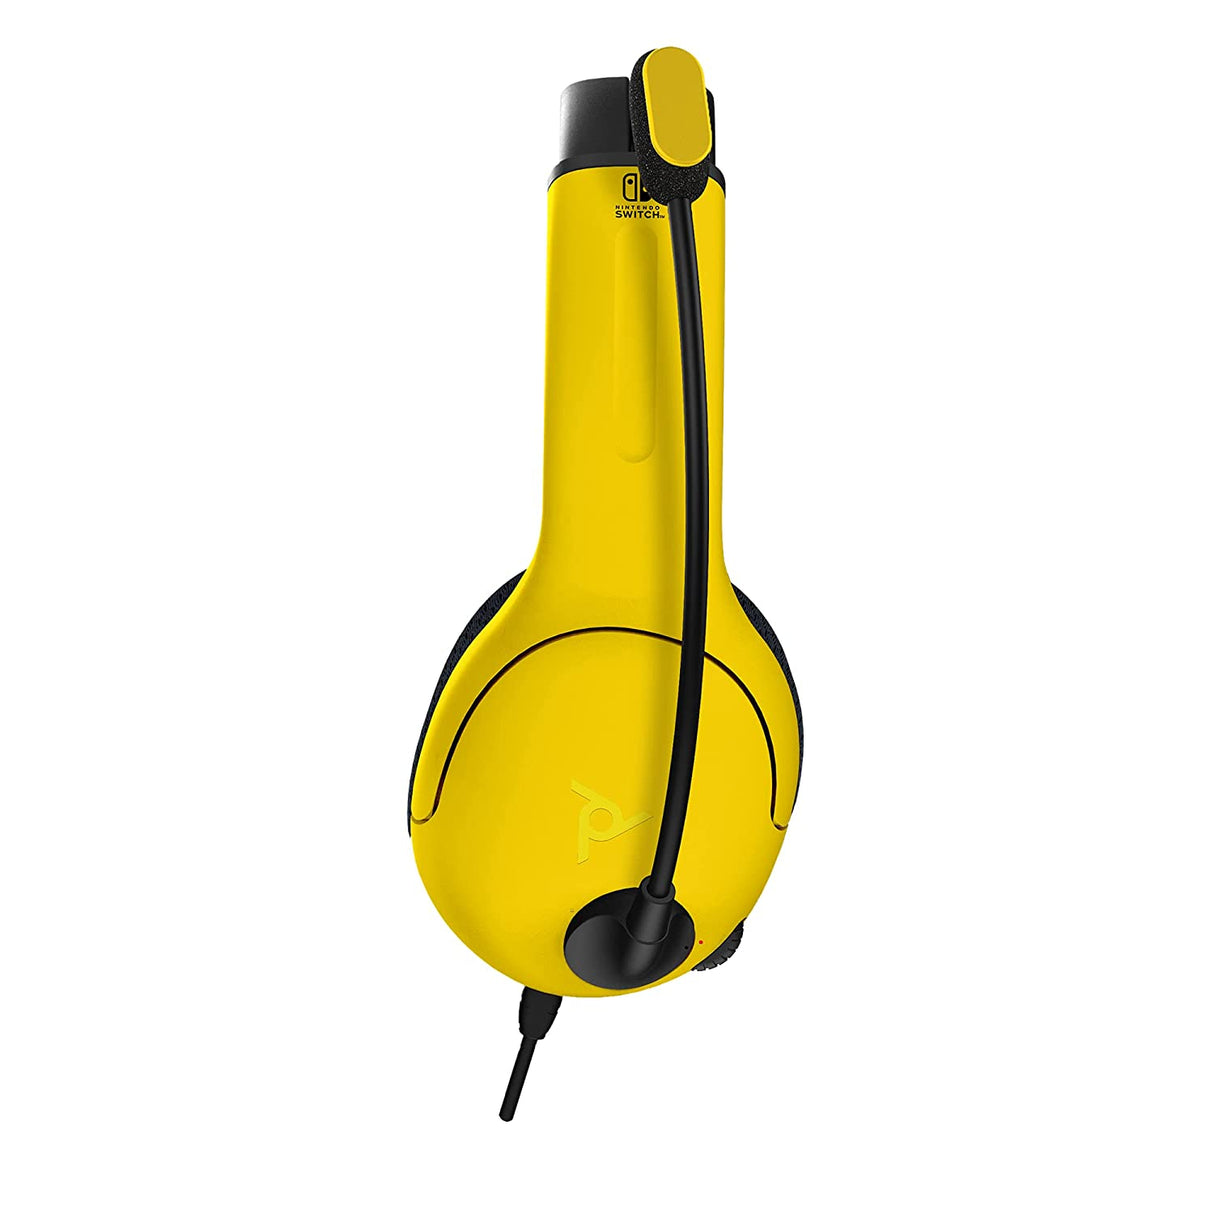 PDP Gaming LVL40 Stereo Headset with Mic, Yellow/Blue, 500-162-YLBL-NA, AYOUB COMPUTERS